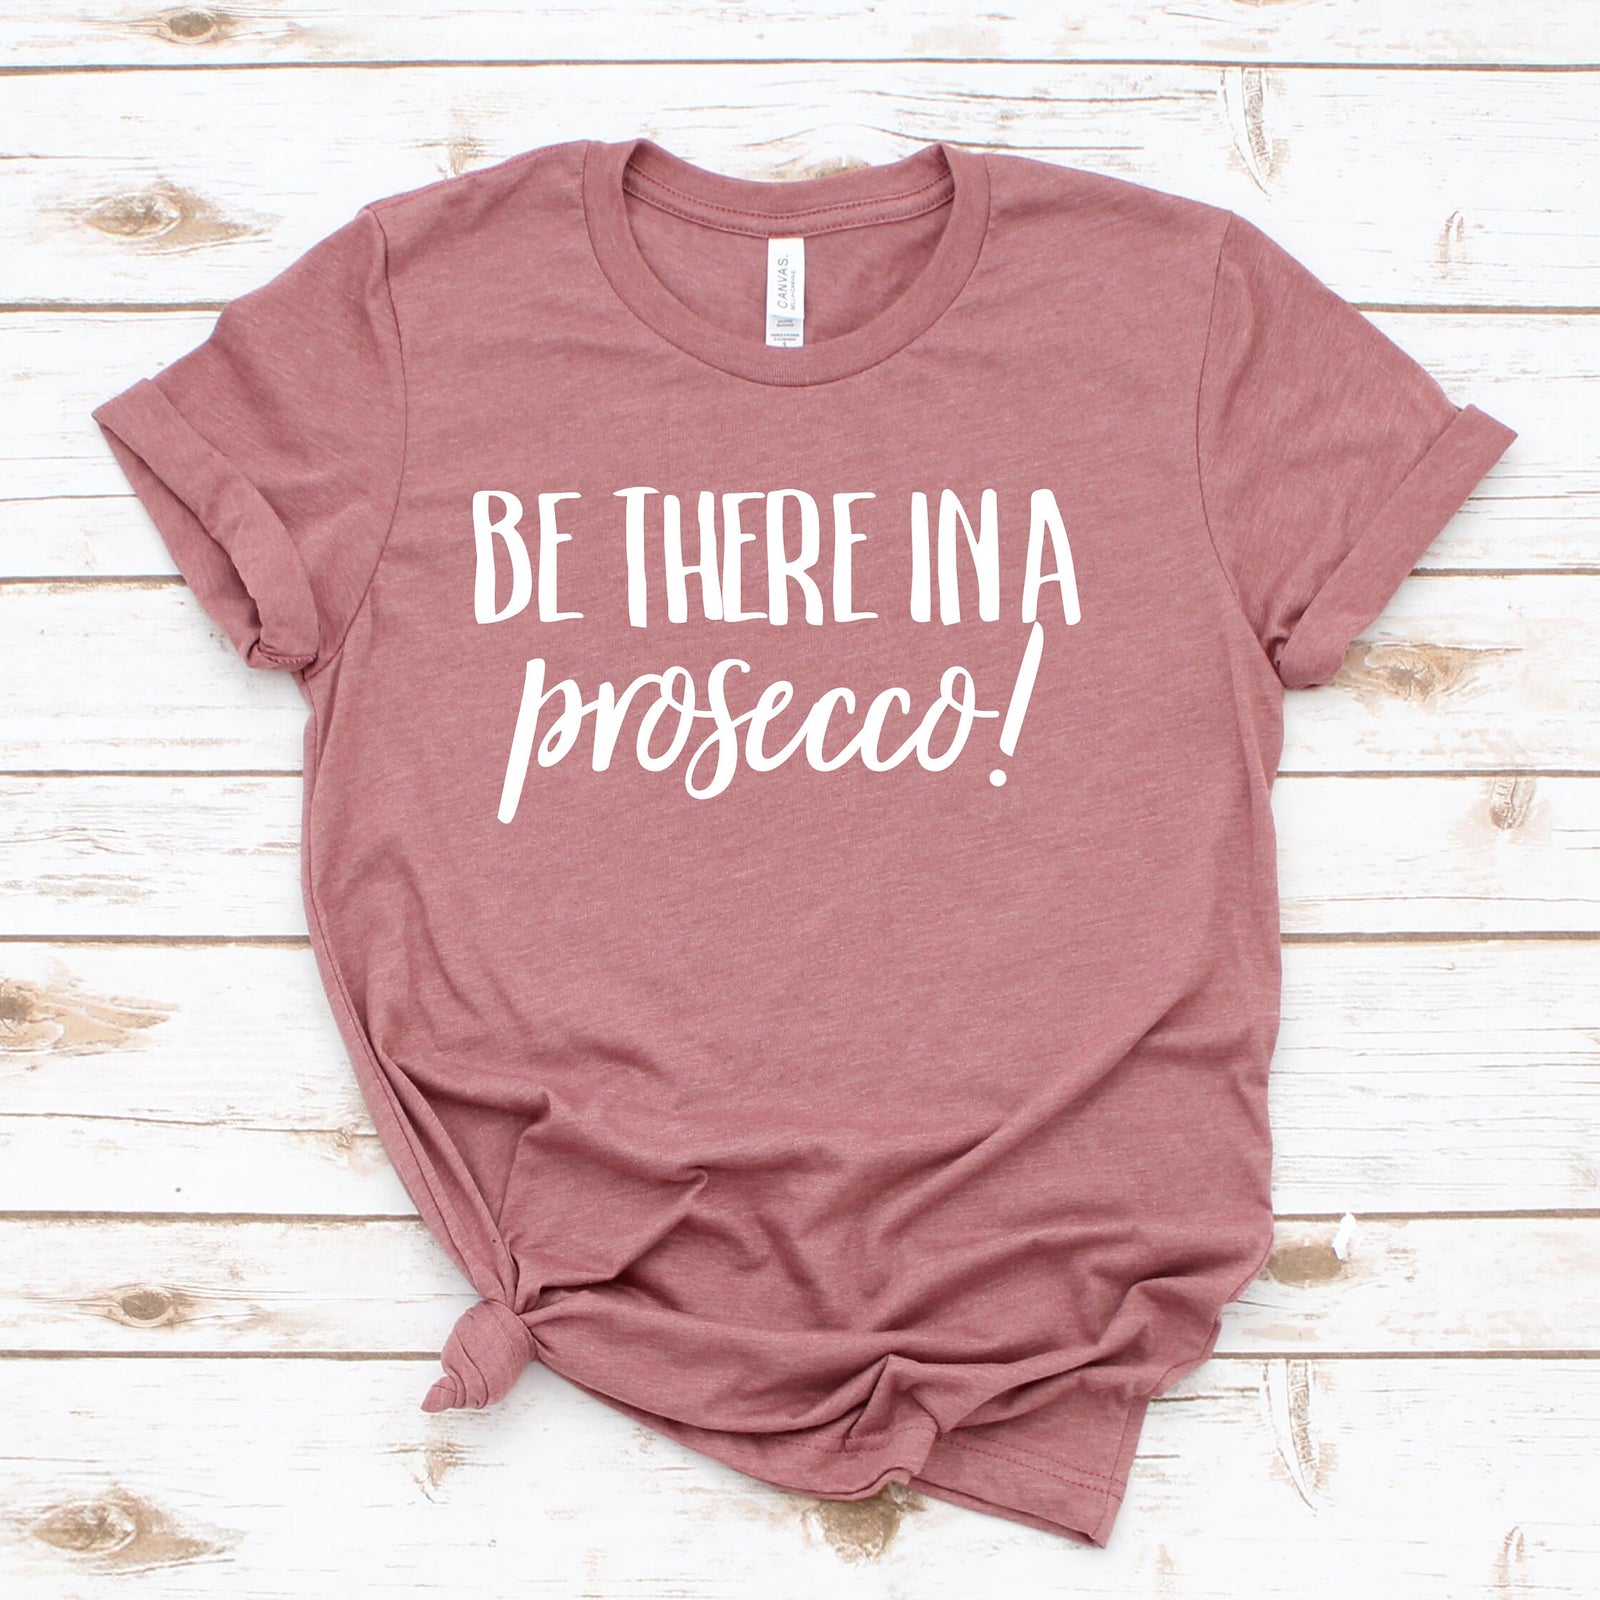 Be There in a Prosecco Christmas T Shirt - Funny Wine Lover Shirt - Matching Couple Shirt - Christmas Party Shirt